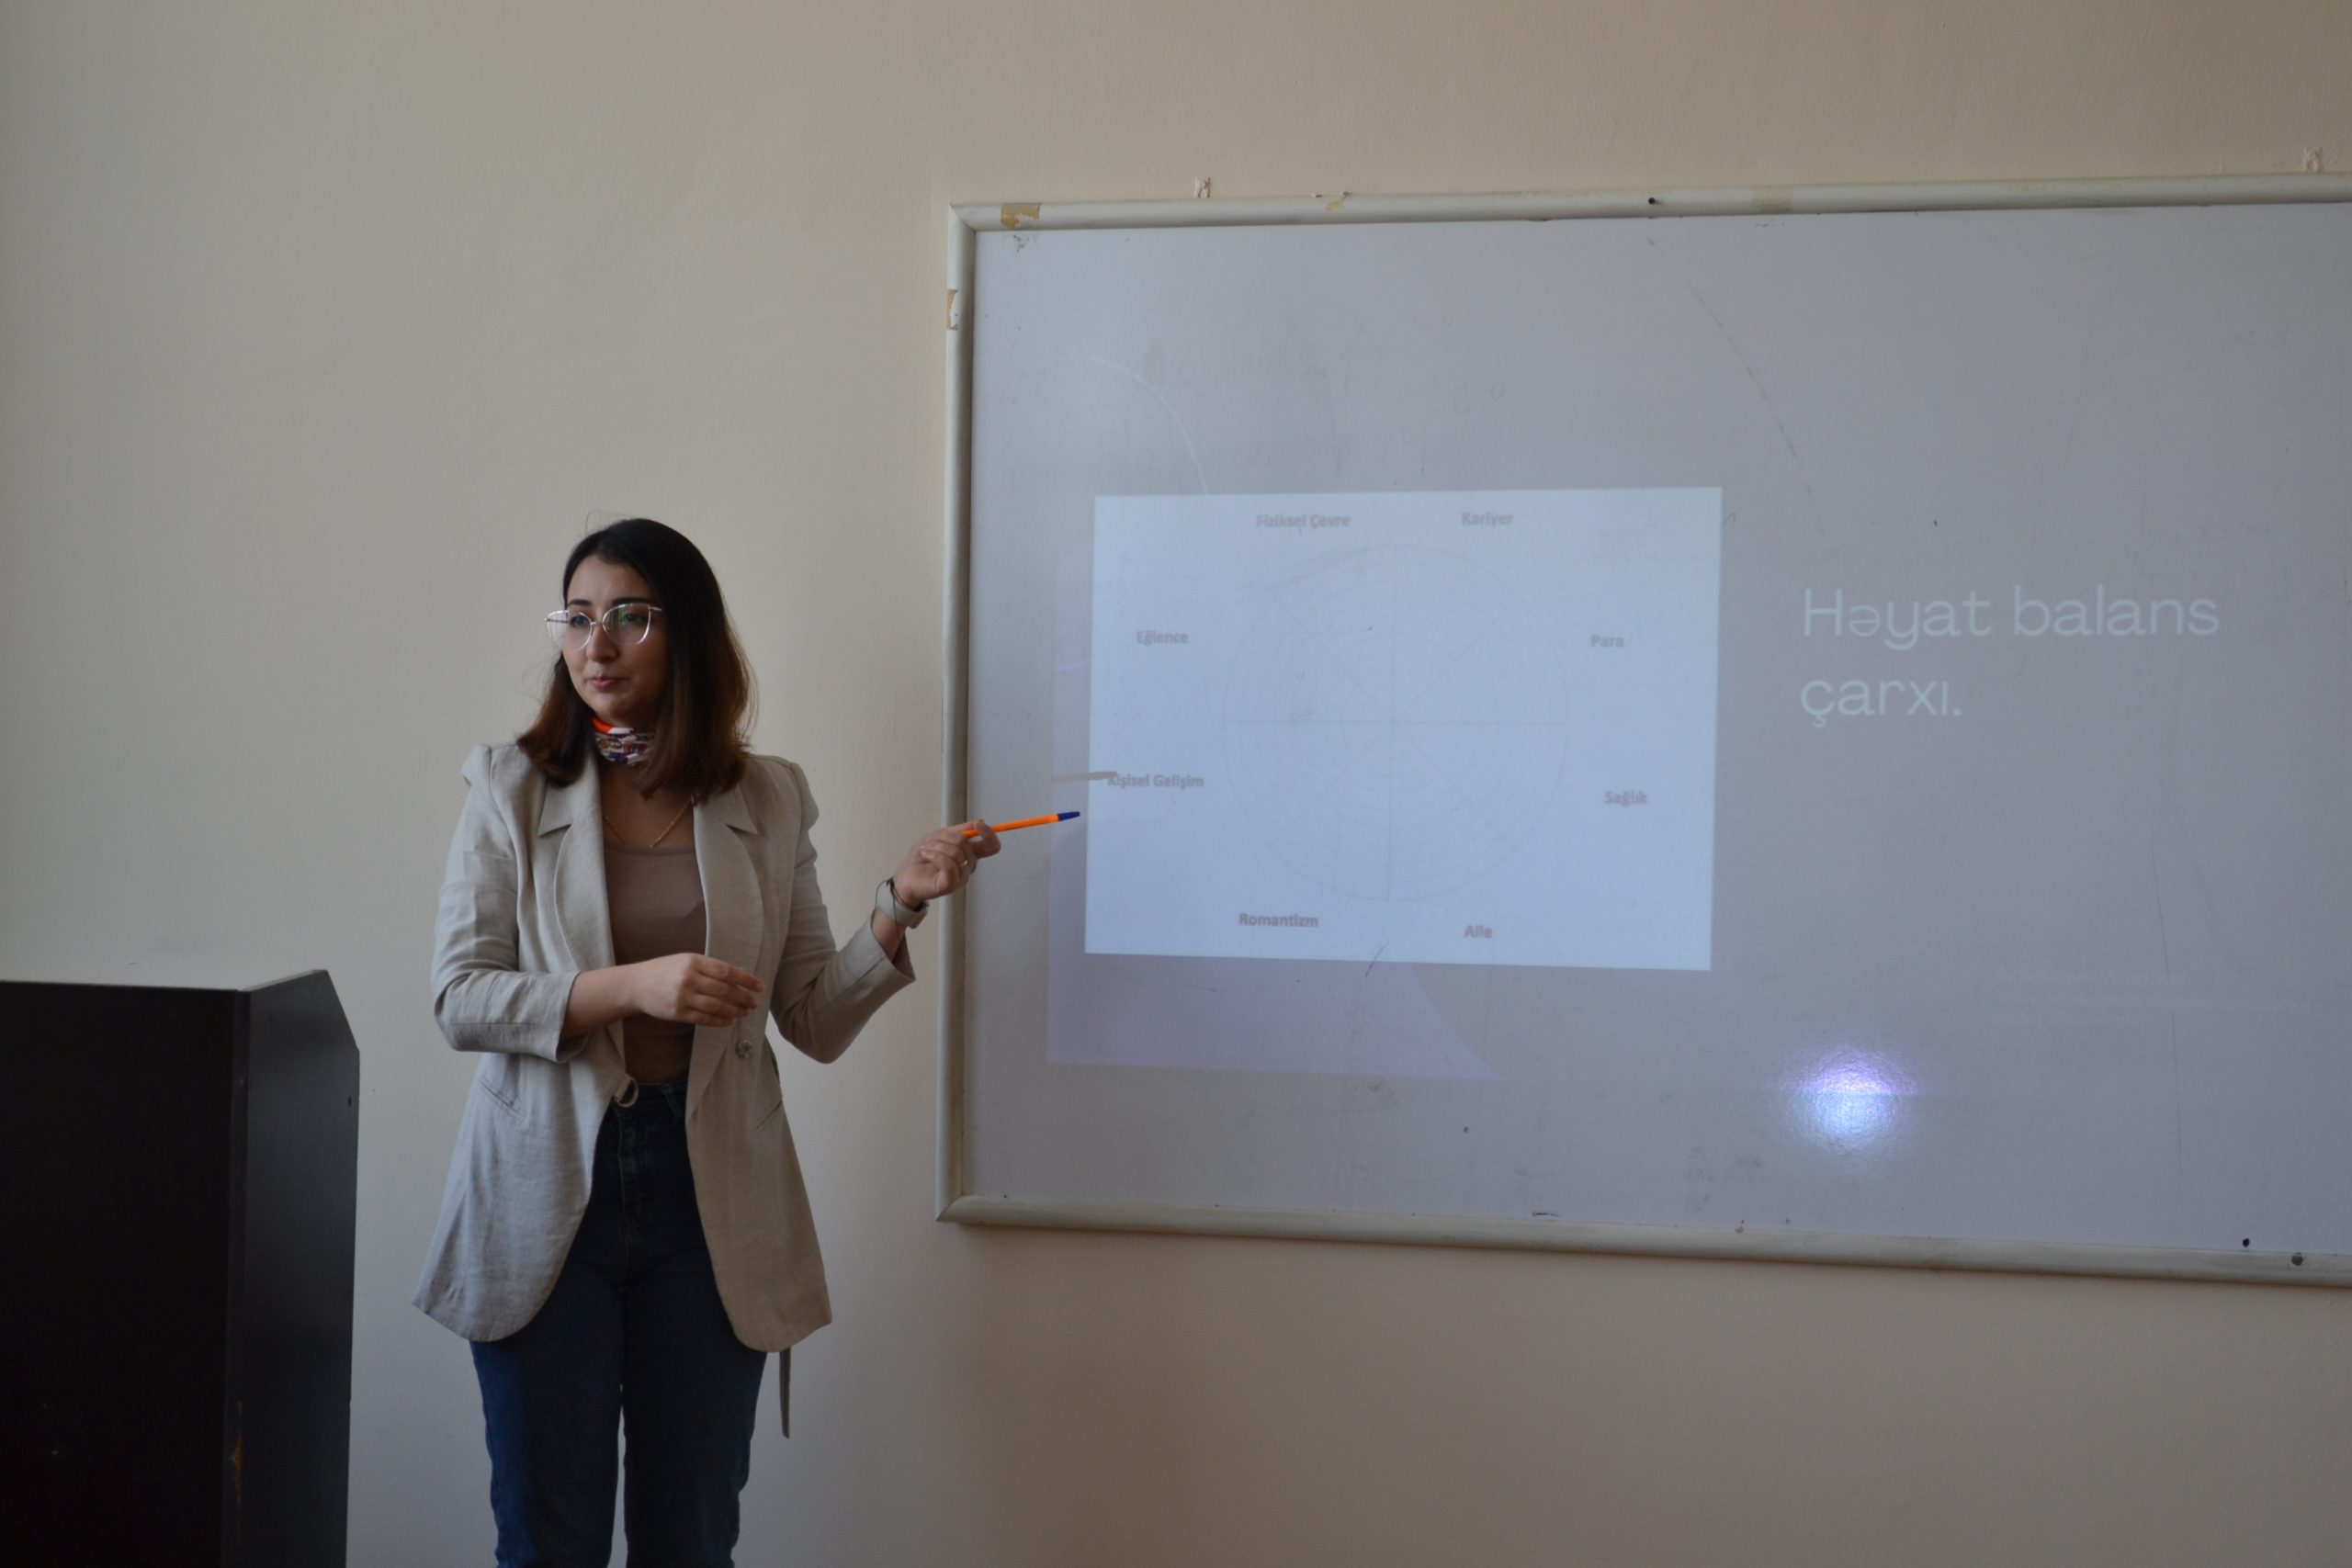 A seminar on “Living life in balance” and “How companies are looking for an employee” was held for the students of Azerbaijan Cooperation University